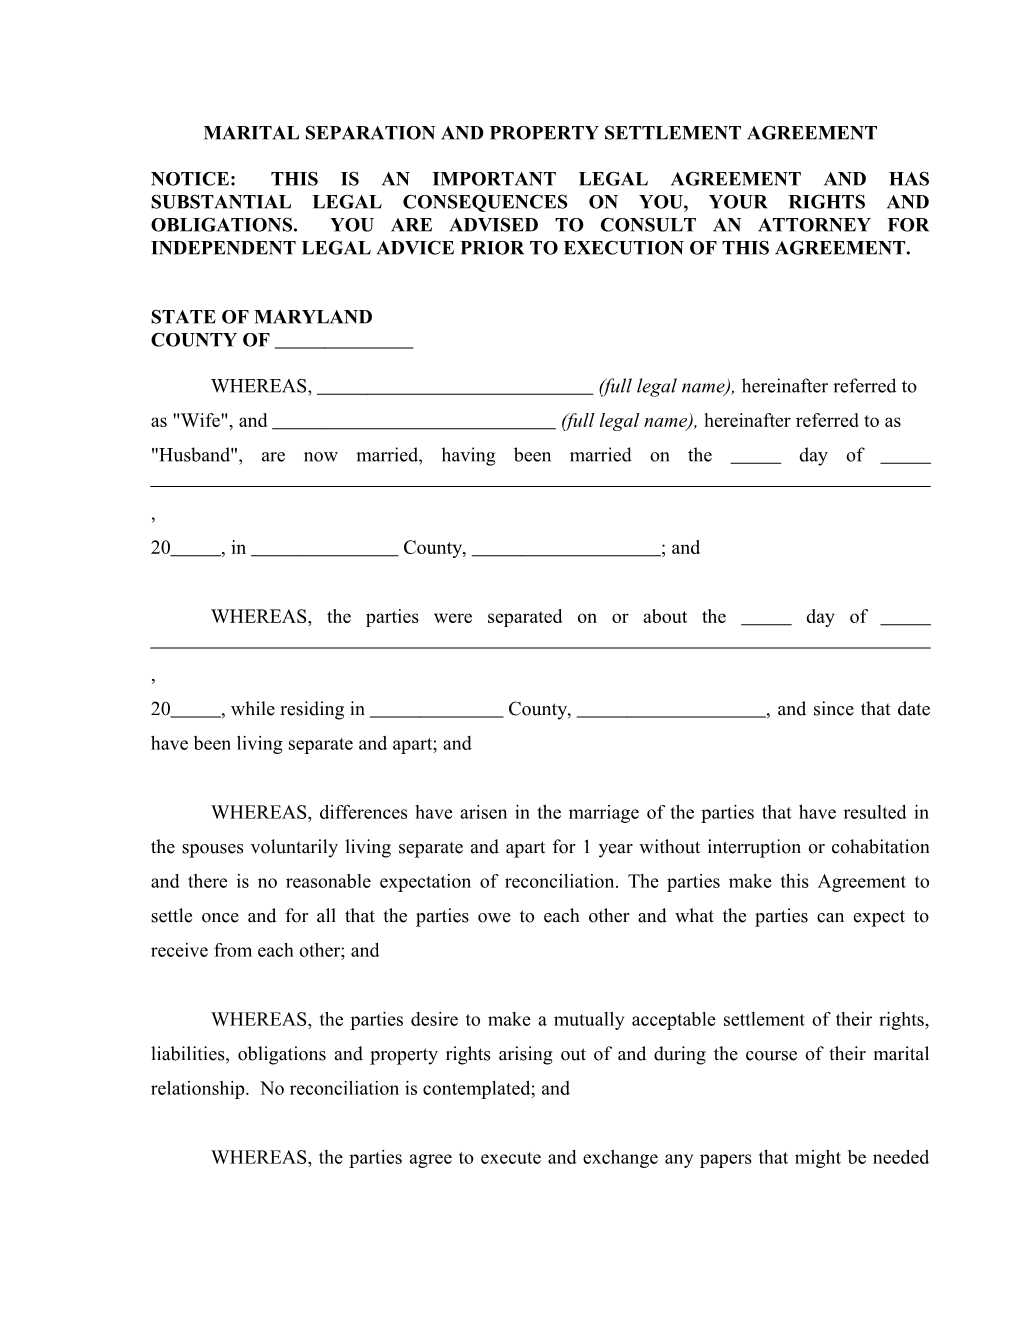 Marital Separation and Property Settlement Agreement